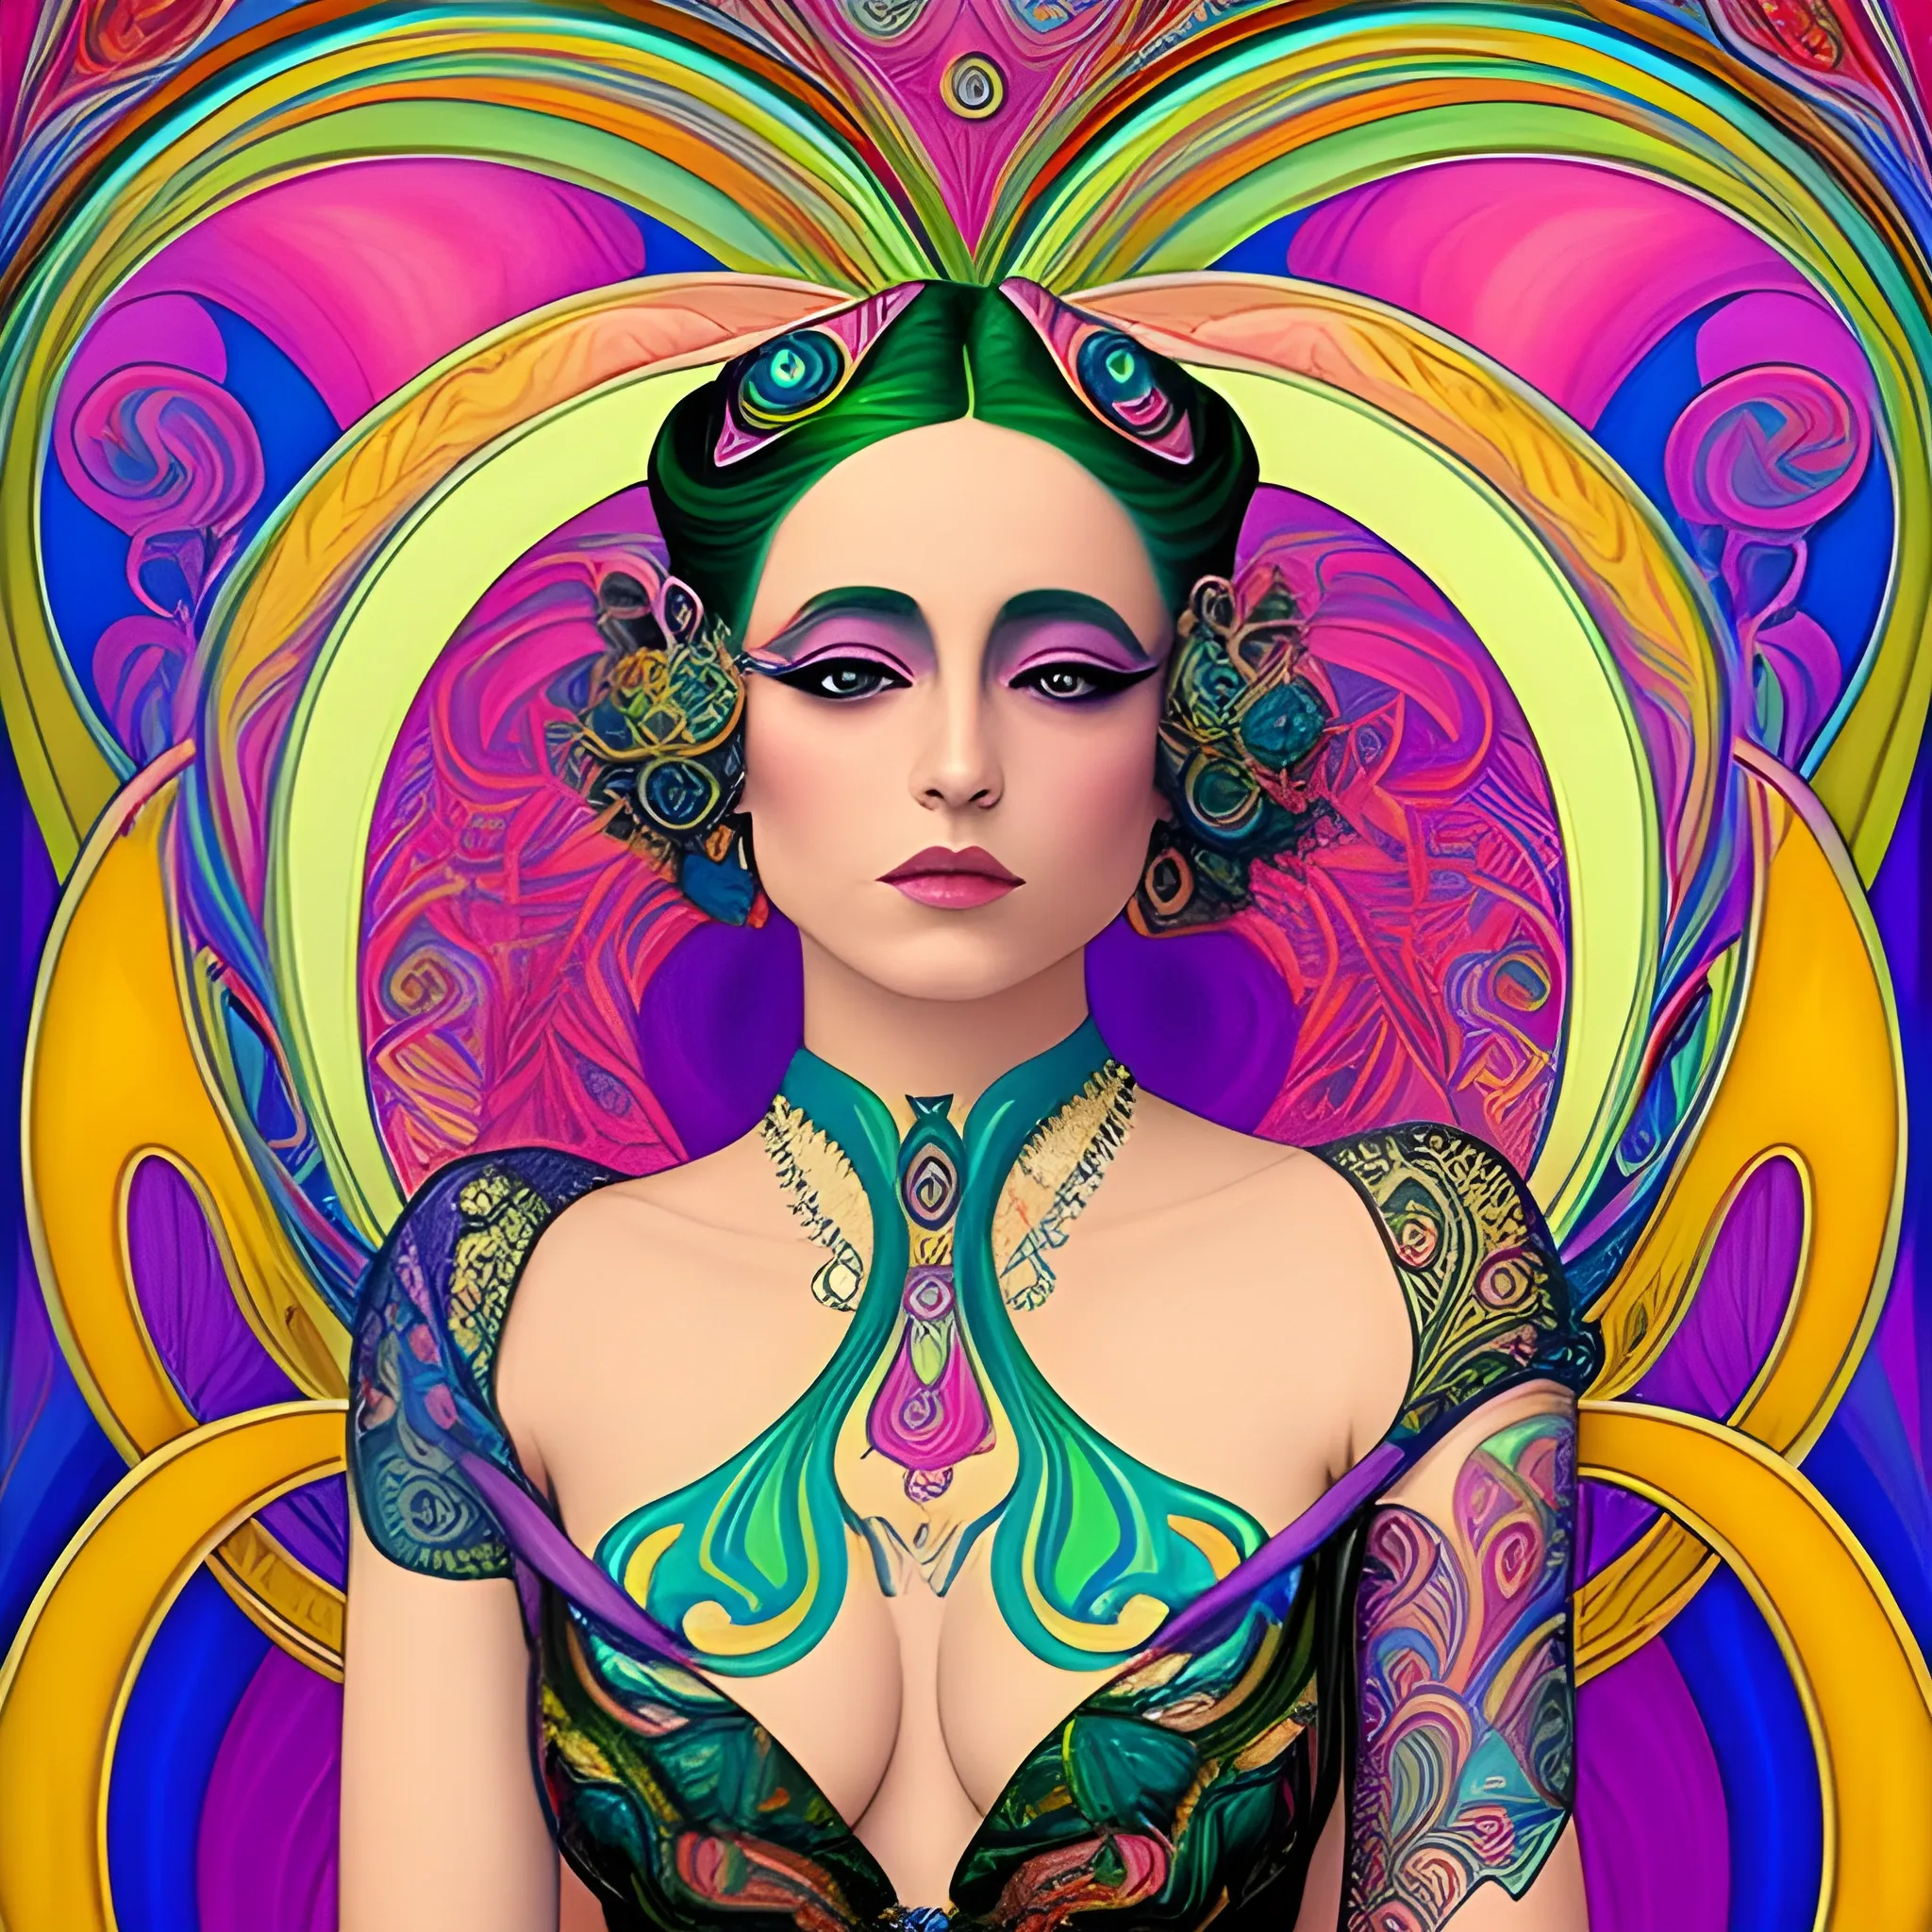 Vargas painting, true aesthetics, stylish fashion shot of a beautiful woman posing in front of a psychedelic art nouveau style. Highly detailed, highest quality